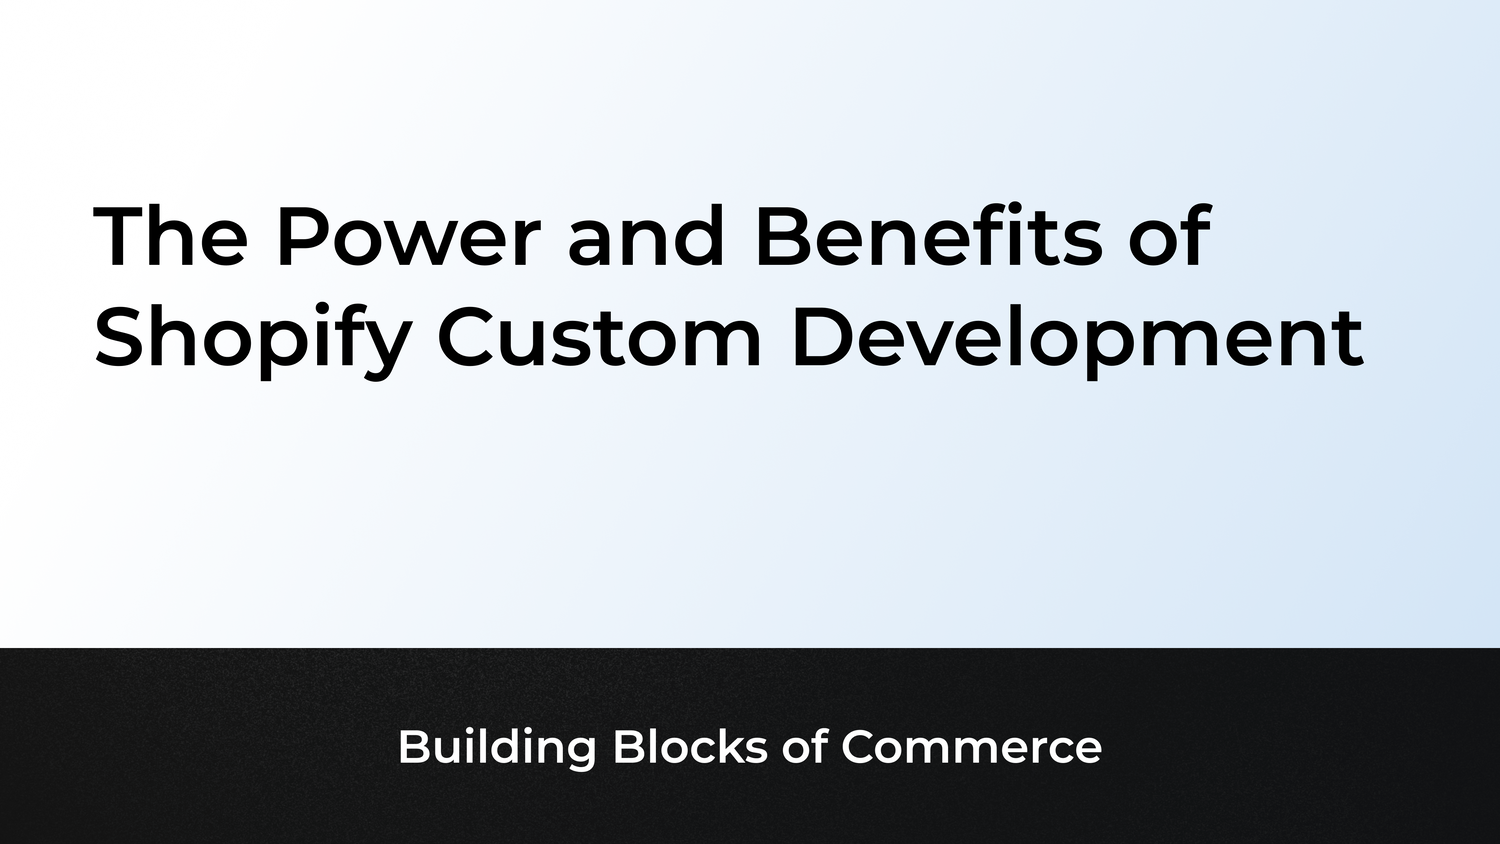 The Power and Benefits of Shopify Custom Development